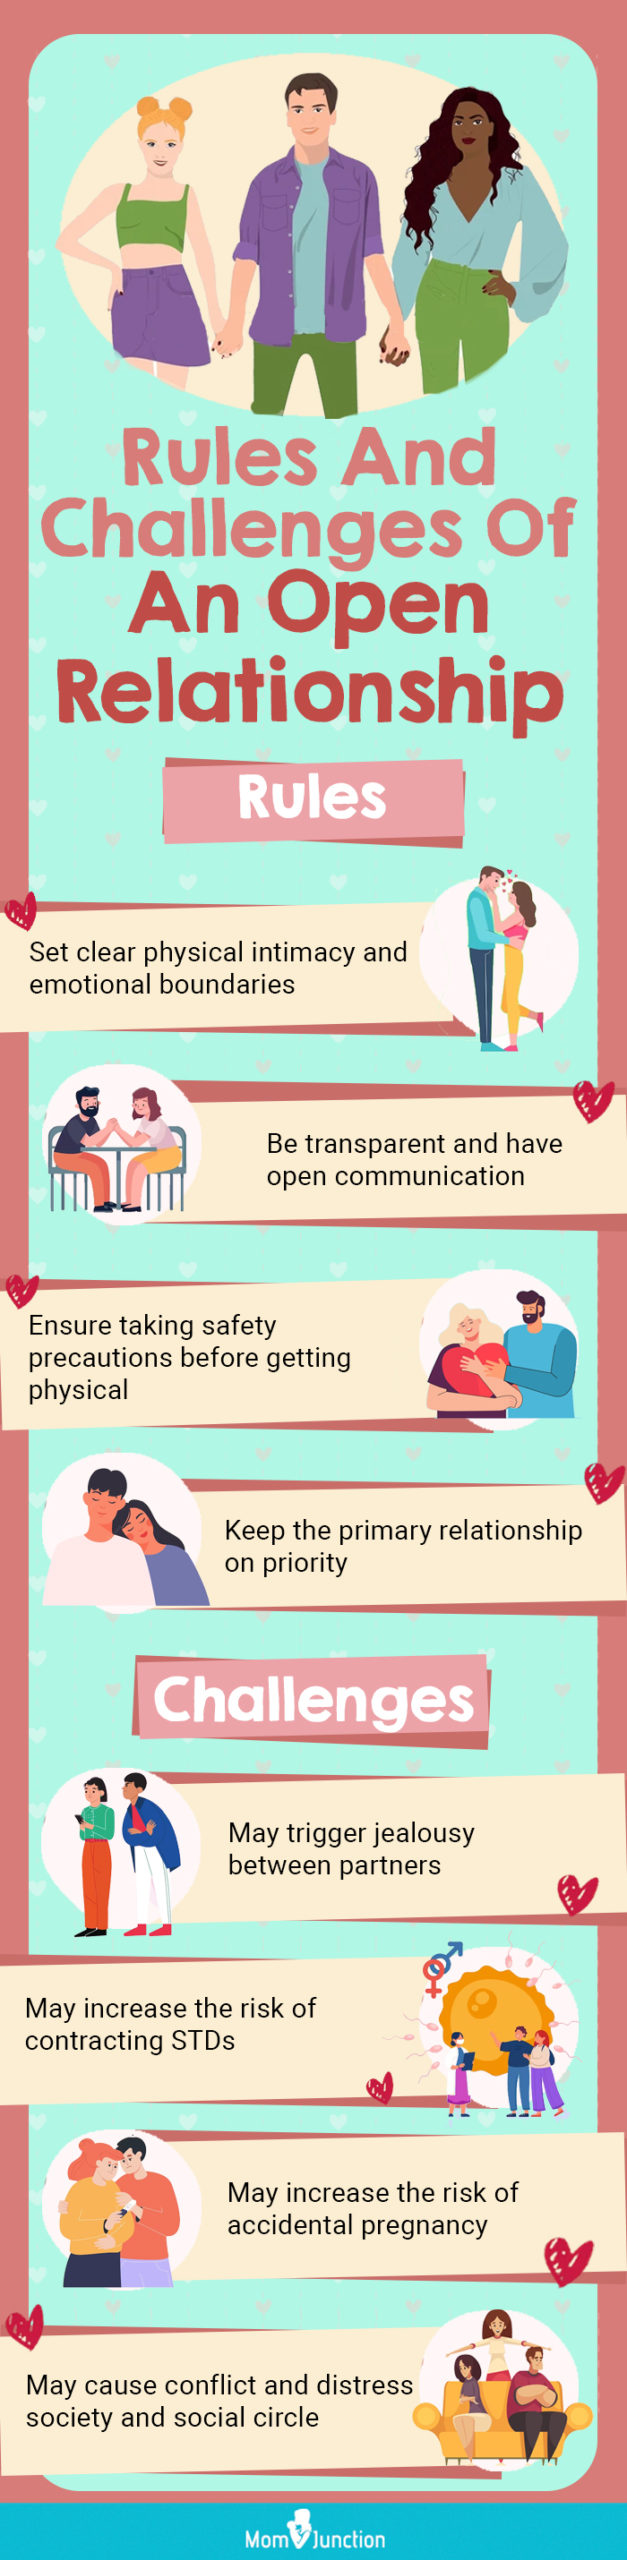 pros and cons of an open relationship (infographic)